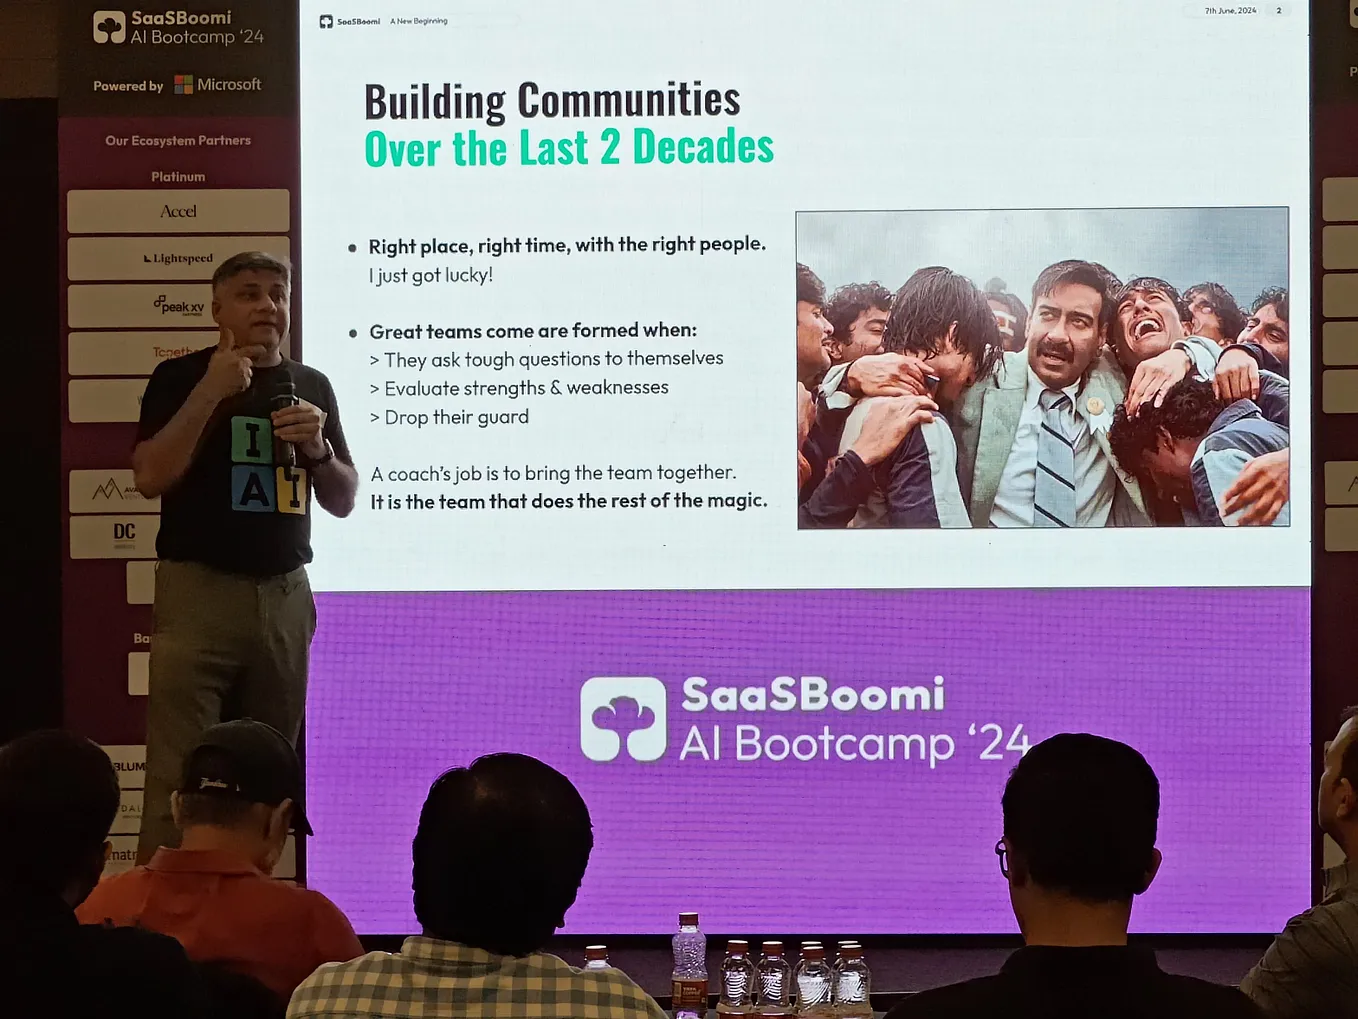 Building Communities from the Ground Up: A Journey of Passion and Success